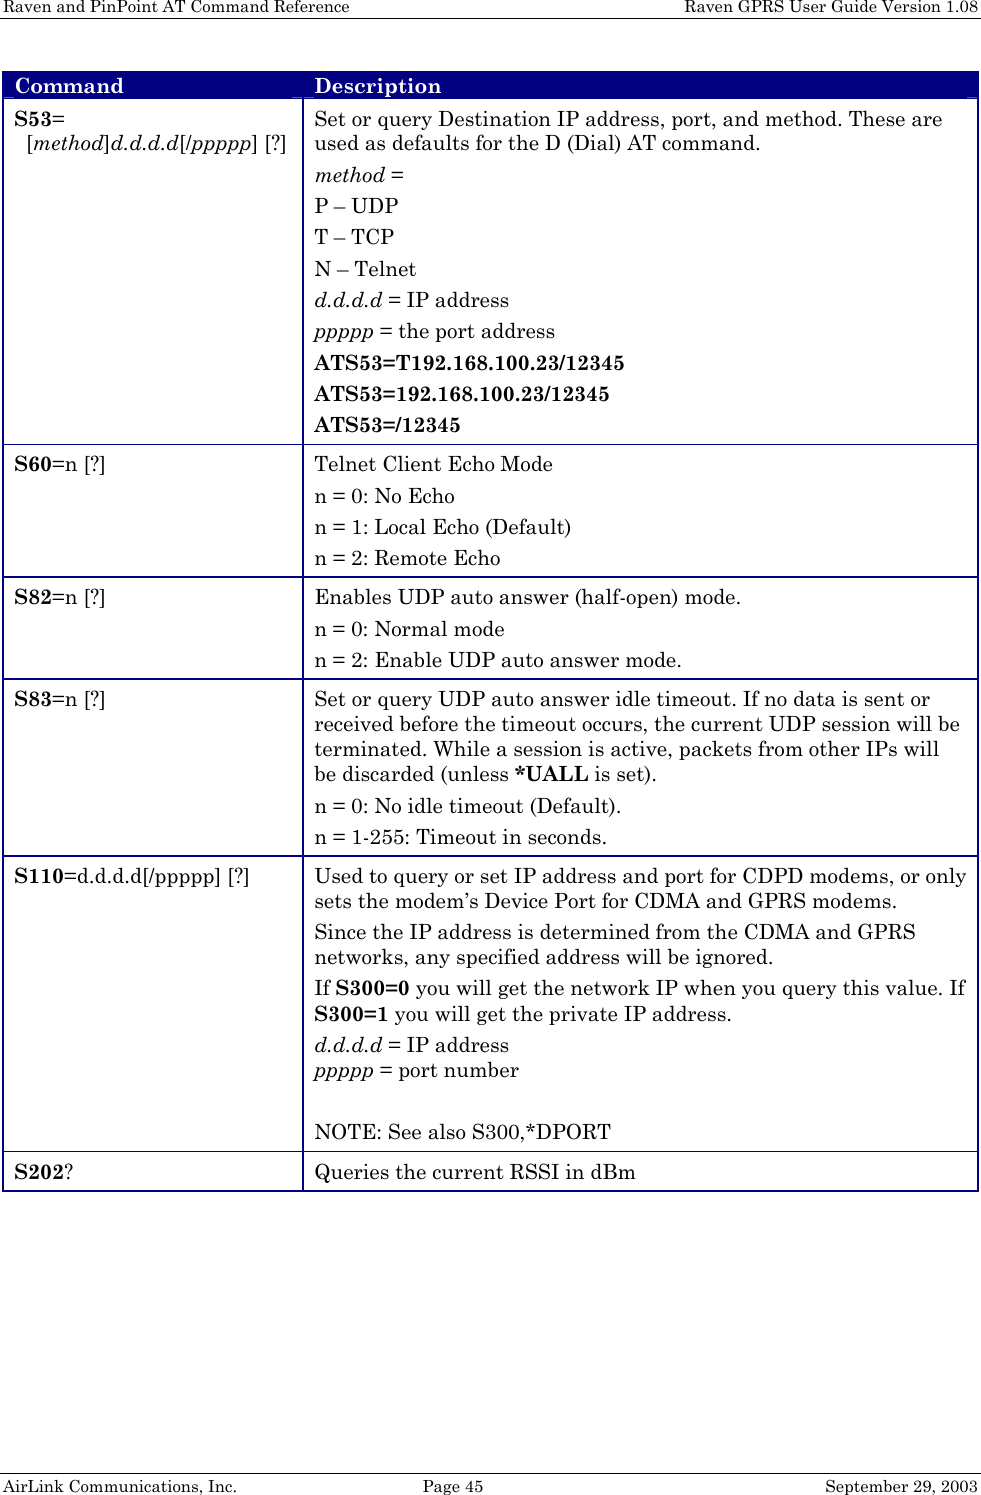 Raven and PinPoint AT Command Reference    Raven GPRS User Guide Version 1.08 AirLink Communications, Inc.  Page 45  September 29, 2003 Command Description S53=   [method]d.d.d.d[/ppppp] [?] Set or query Destination IP address, port, and method. These are used as defaults for the D (Dial) AT command. method = P – UDP T – TCP N – Telnet d.d.d.d = IP address ppppp = the port address ATS53=T192.168.100.23/12345 ATS53=192.168.100.23/12345 ATS53=/12345 S60=n [?] Telnet Client Echo Mode n = 0: No Echo n = 1: Local Echo (Default) n = 2: Remote Echo S82=n [?] Enables UDP auto answer (half-open) mode. n = 0: Normal mode n = 2: Enable UDP auto answer mode. S83=n [?] Set or query UDP auto answer idle timeout. If no data is sent or received before the timeout occurs, the current UDP session will be terminated. While a session is active, packets from other IPs will be discarded (unless *UALL is set). n = 0: No idle timeout (Default). n = 1-255: Timeout in seconds. S110=d.d.d.d[/ppppp] [?] Used to query or set IP address and port for CDPD modems, or only sets the modem’s Device Port for CDMA and GPRS modems. Since the IP address is determined from the CDMA and GPRS networks, any specified address will be ignored.  If S300=0 you will get the network IP when you query this value. If S300=1 you will get the private IP address. d.d.d.d = IP address ppppp = port number  NOTE: See also S300,*DPORT S202? Queries the current RSSI in dBm 